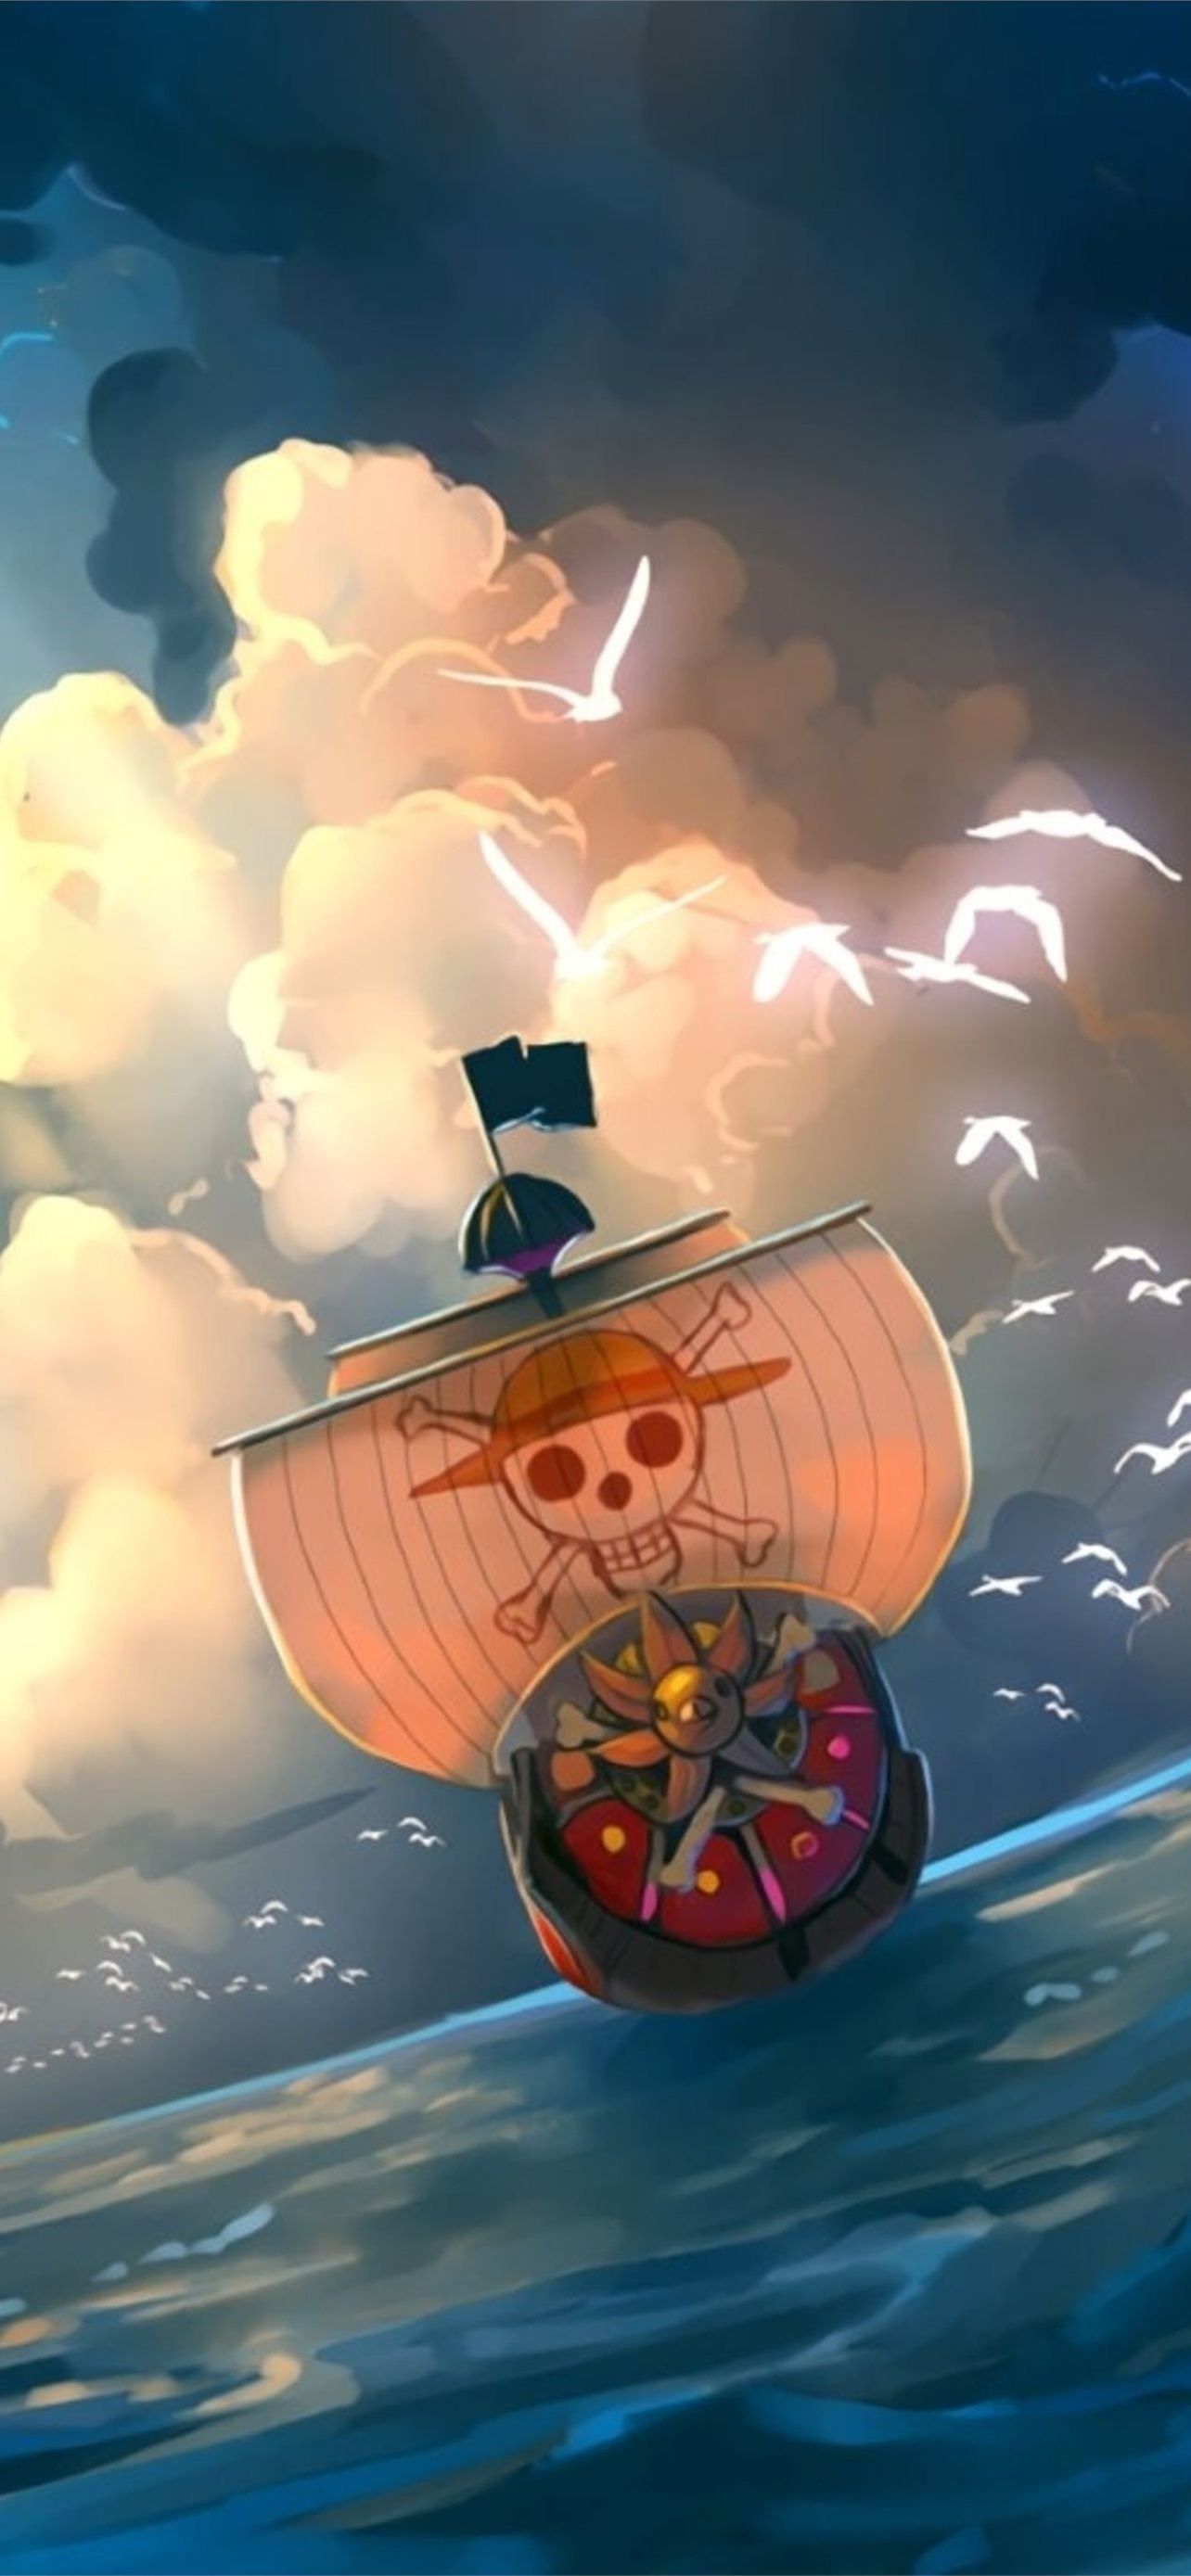 Download wallpapers One Piece, anime, Straw Hat Pirates, Thousand Sunny, 4k, new, One Piece anime, One Piece season 9, One Piece series, One Piece art for desktop and mobile devices in high resolution - One Piece